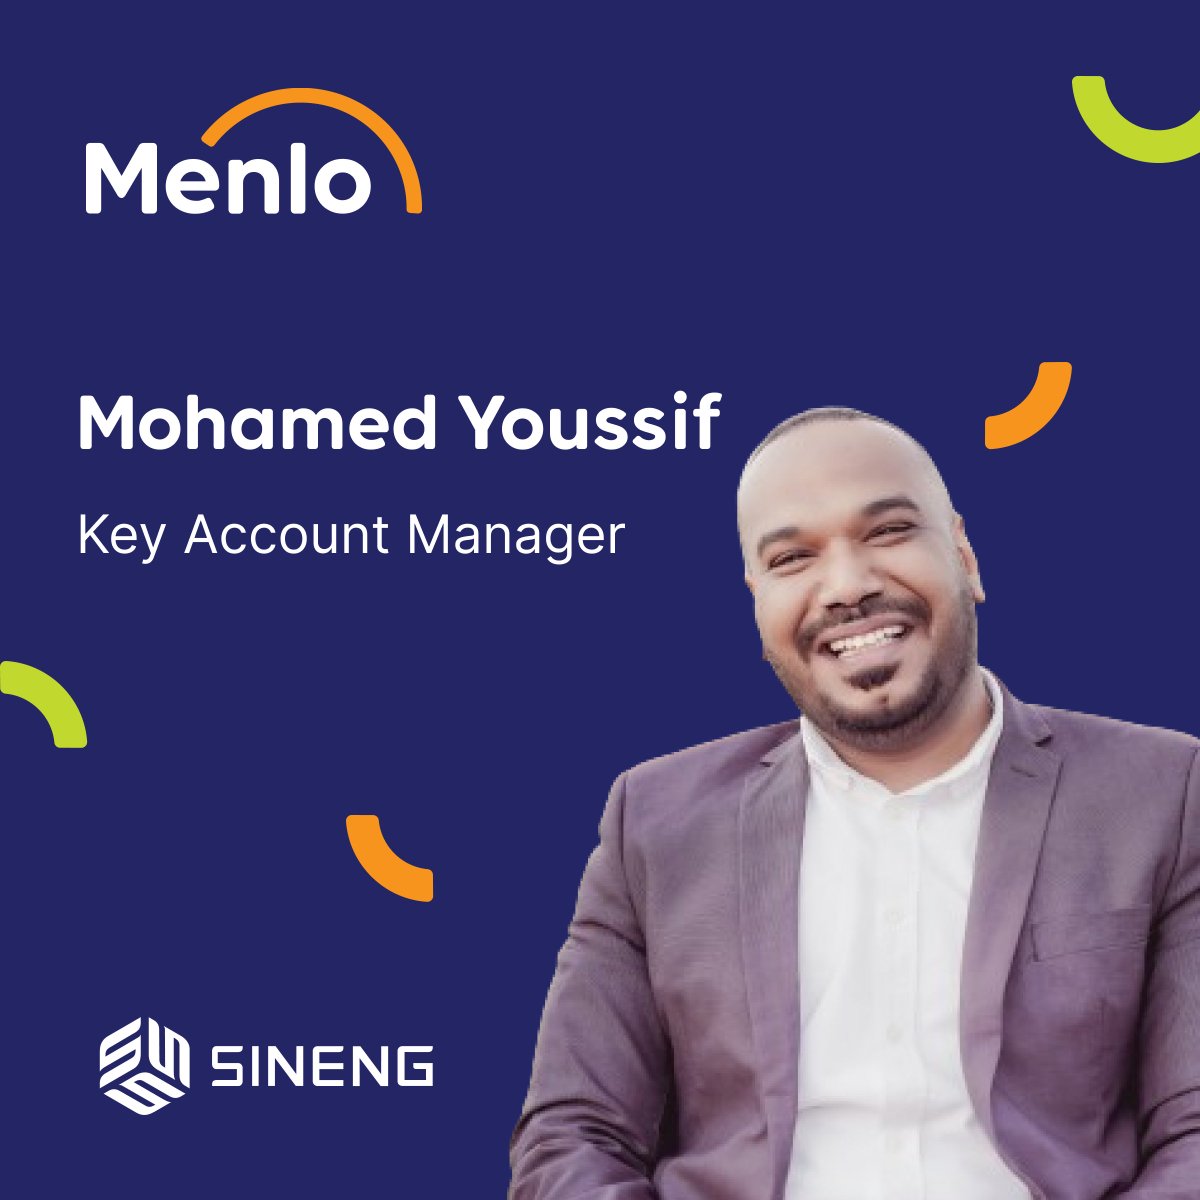 In this exclusive interview, we dive into the journey of Mohamed Yosif, a passionate Solar Energy professional with over 6 years of experience. Read more: ow.ly/xbF950RXPLx #solardistribution #MENA #RenewableEnergy